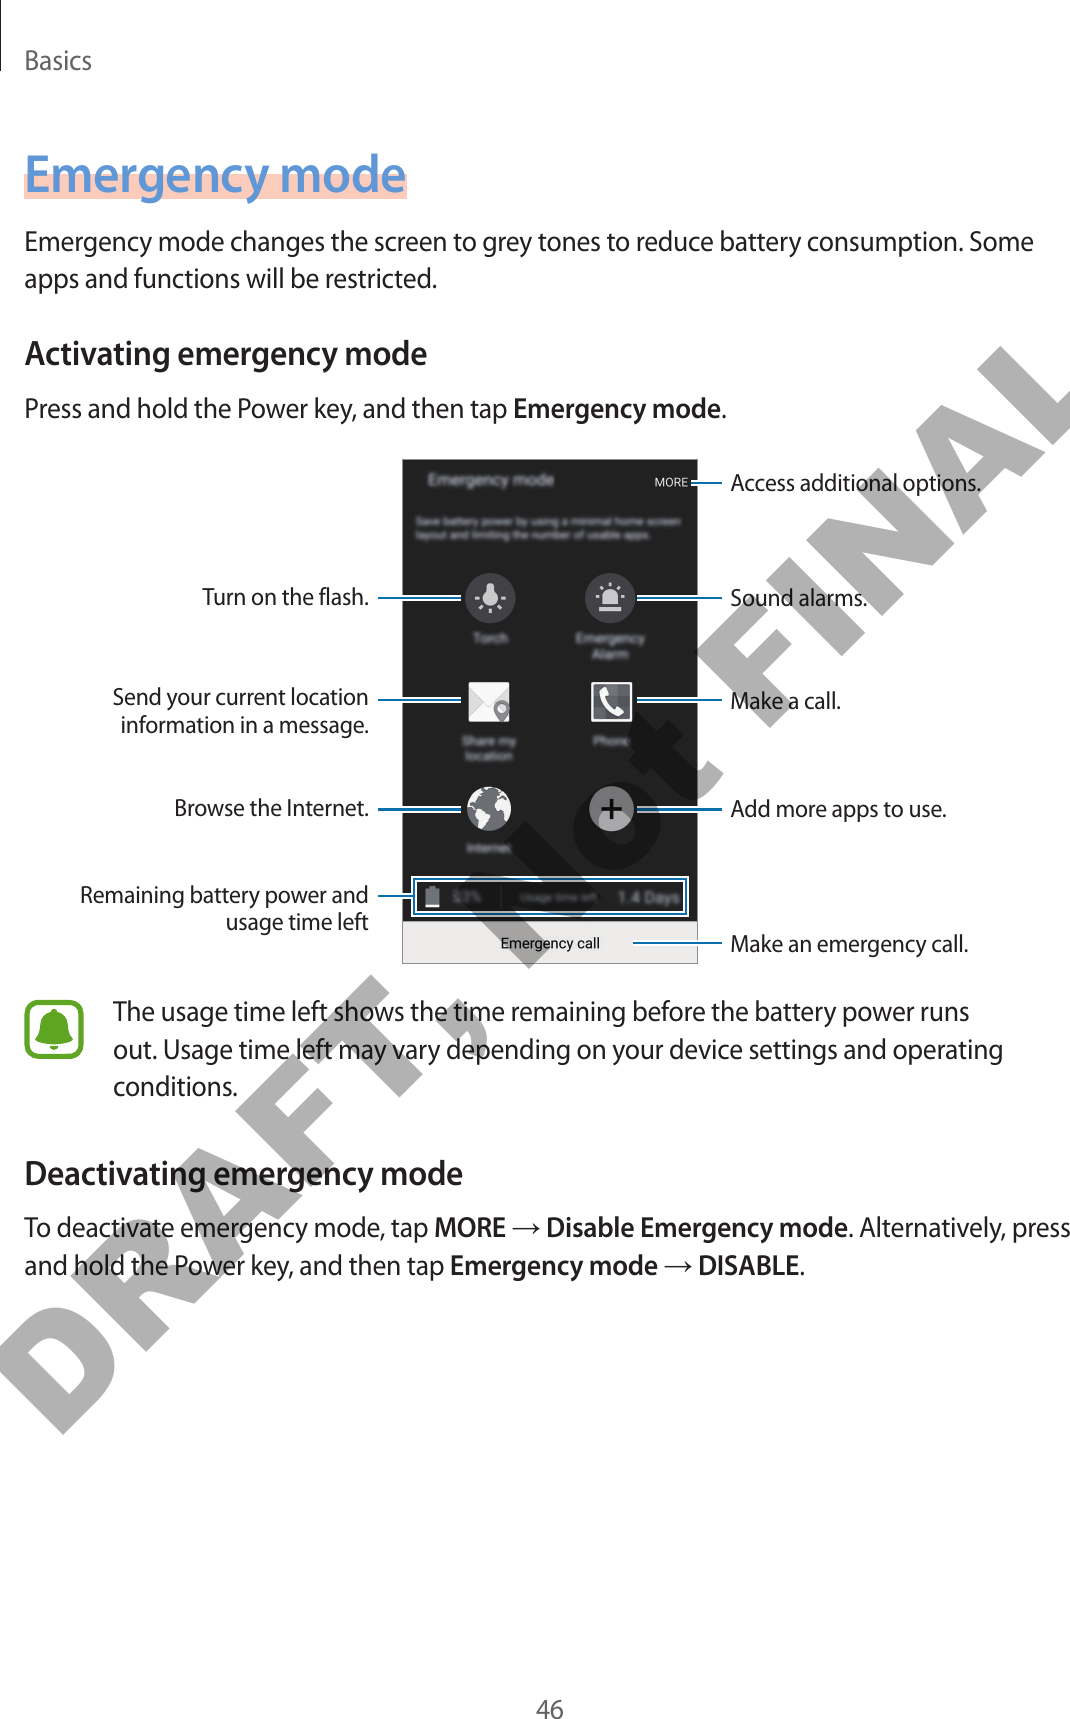 Basics46Emergency modeEmergency mode changes the screen to grey tones to reduce battery consumption. Some apps and functions will be restricted.Activating emergency modePress and hold the Power key, and then tap Emergency mode.Add more apps to use.Make an emergency call.Remaining battery power and usage time leftTurn on the flash.Make a call.Send your current location information in a message.Browse the Internet.Access additional options.Sound alarms.The usage time left shows the time remaining before the battery power runs out. Usage time left may vary depending on your device settings and operating conditions.Deactivating emergency modeTo deactivate emergency mode, tap MORE → Disable Emergency mode. Alternatively, press and hold the Power key, and then tap Emergency mode → DISABLE.DRAFT, Not FINAL